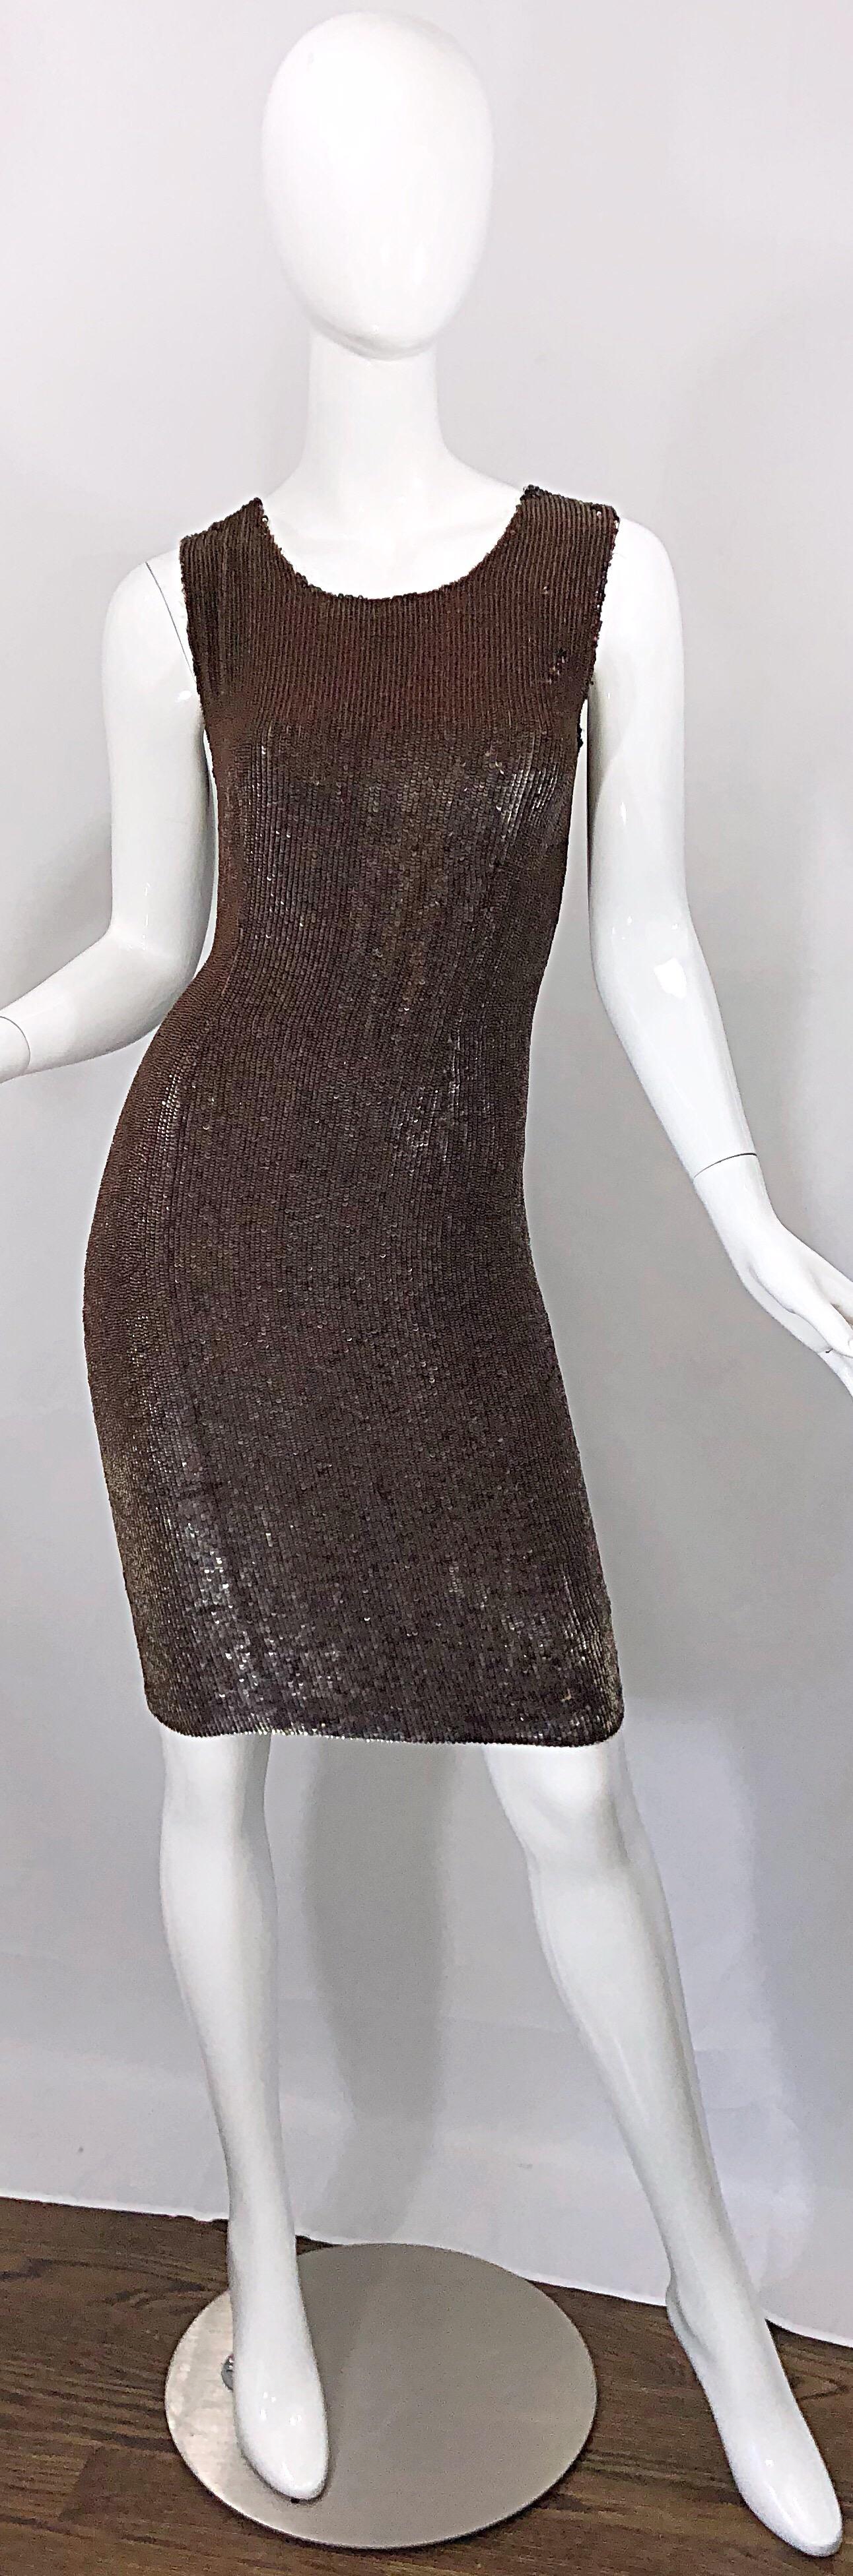 Stunning brand new with tags vintage BILL BLASS, by MICHAEL VOLBRACHT brown / bronze fully sequined sheath dress! Features thousands of tiny hand-sewn sequins throughout the entire dress. Sequins are brown, but give off a golden bronze sheen in